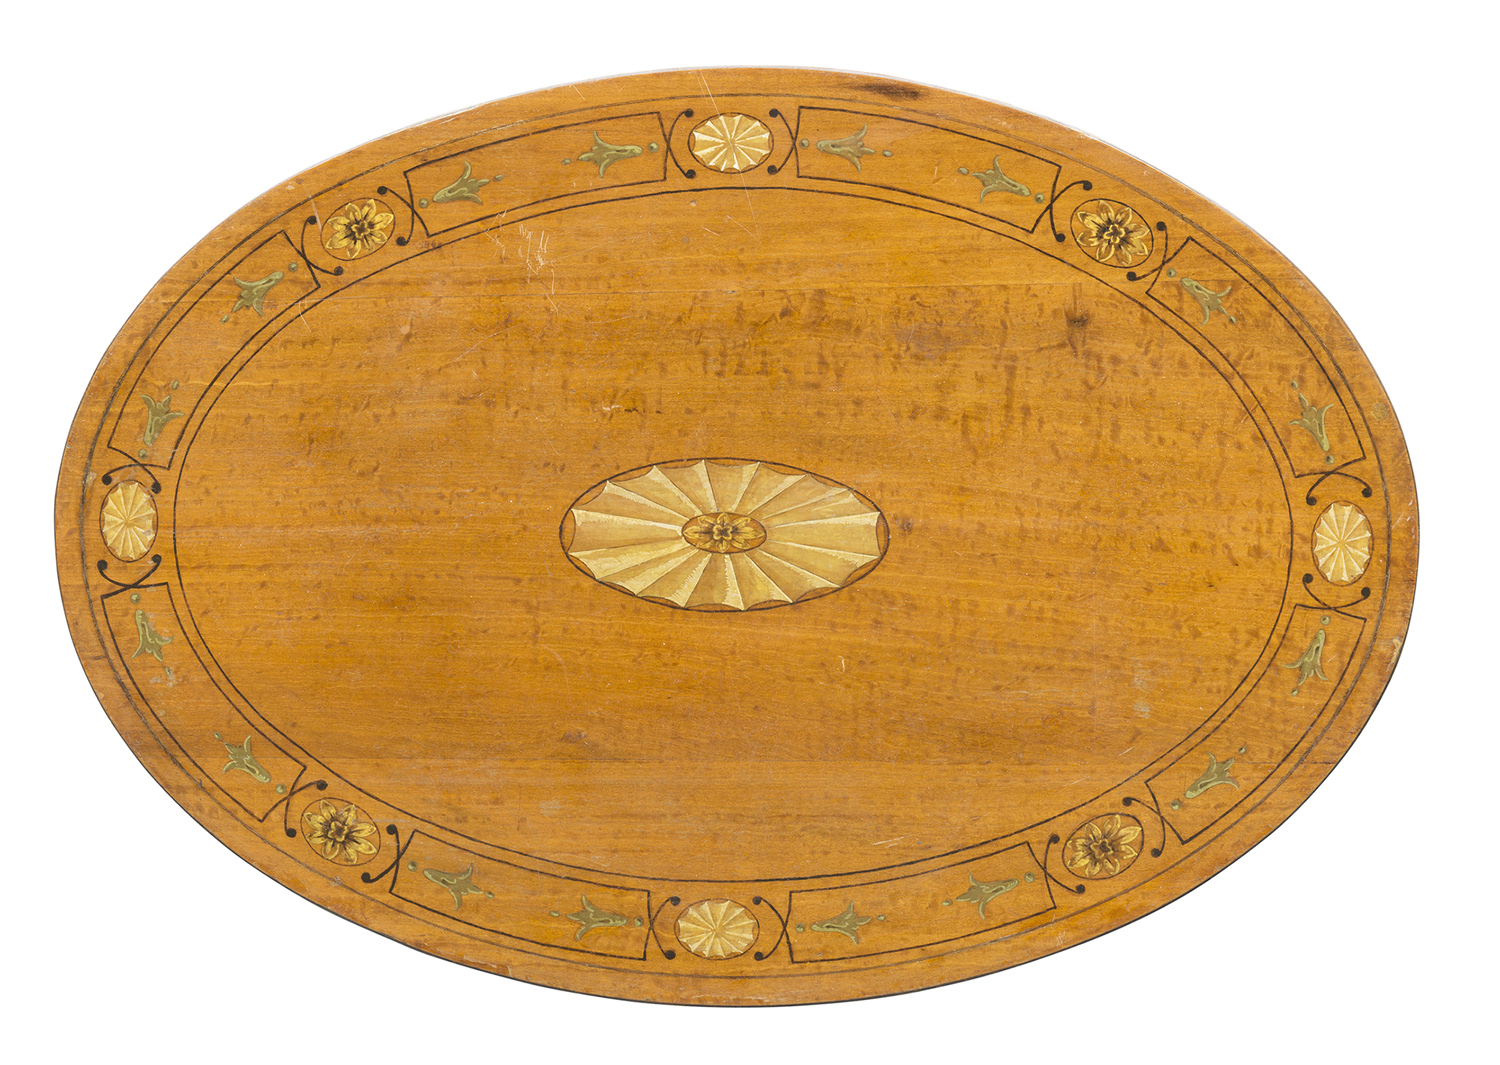 TABLE IN SATIN WOOD ENGLAND 19th CENTURY - Image 2 of 2